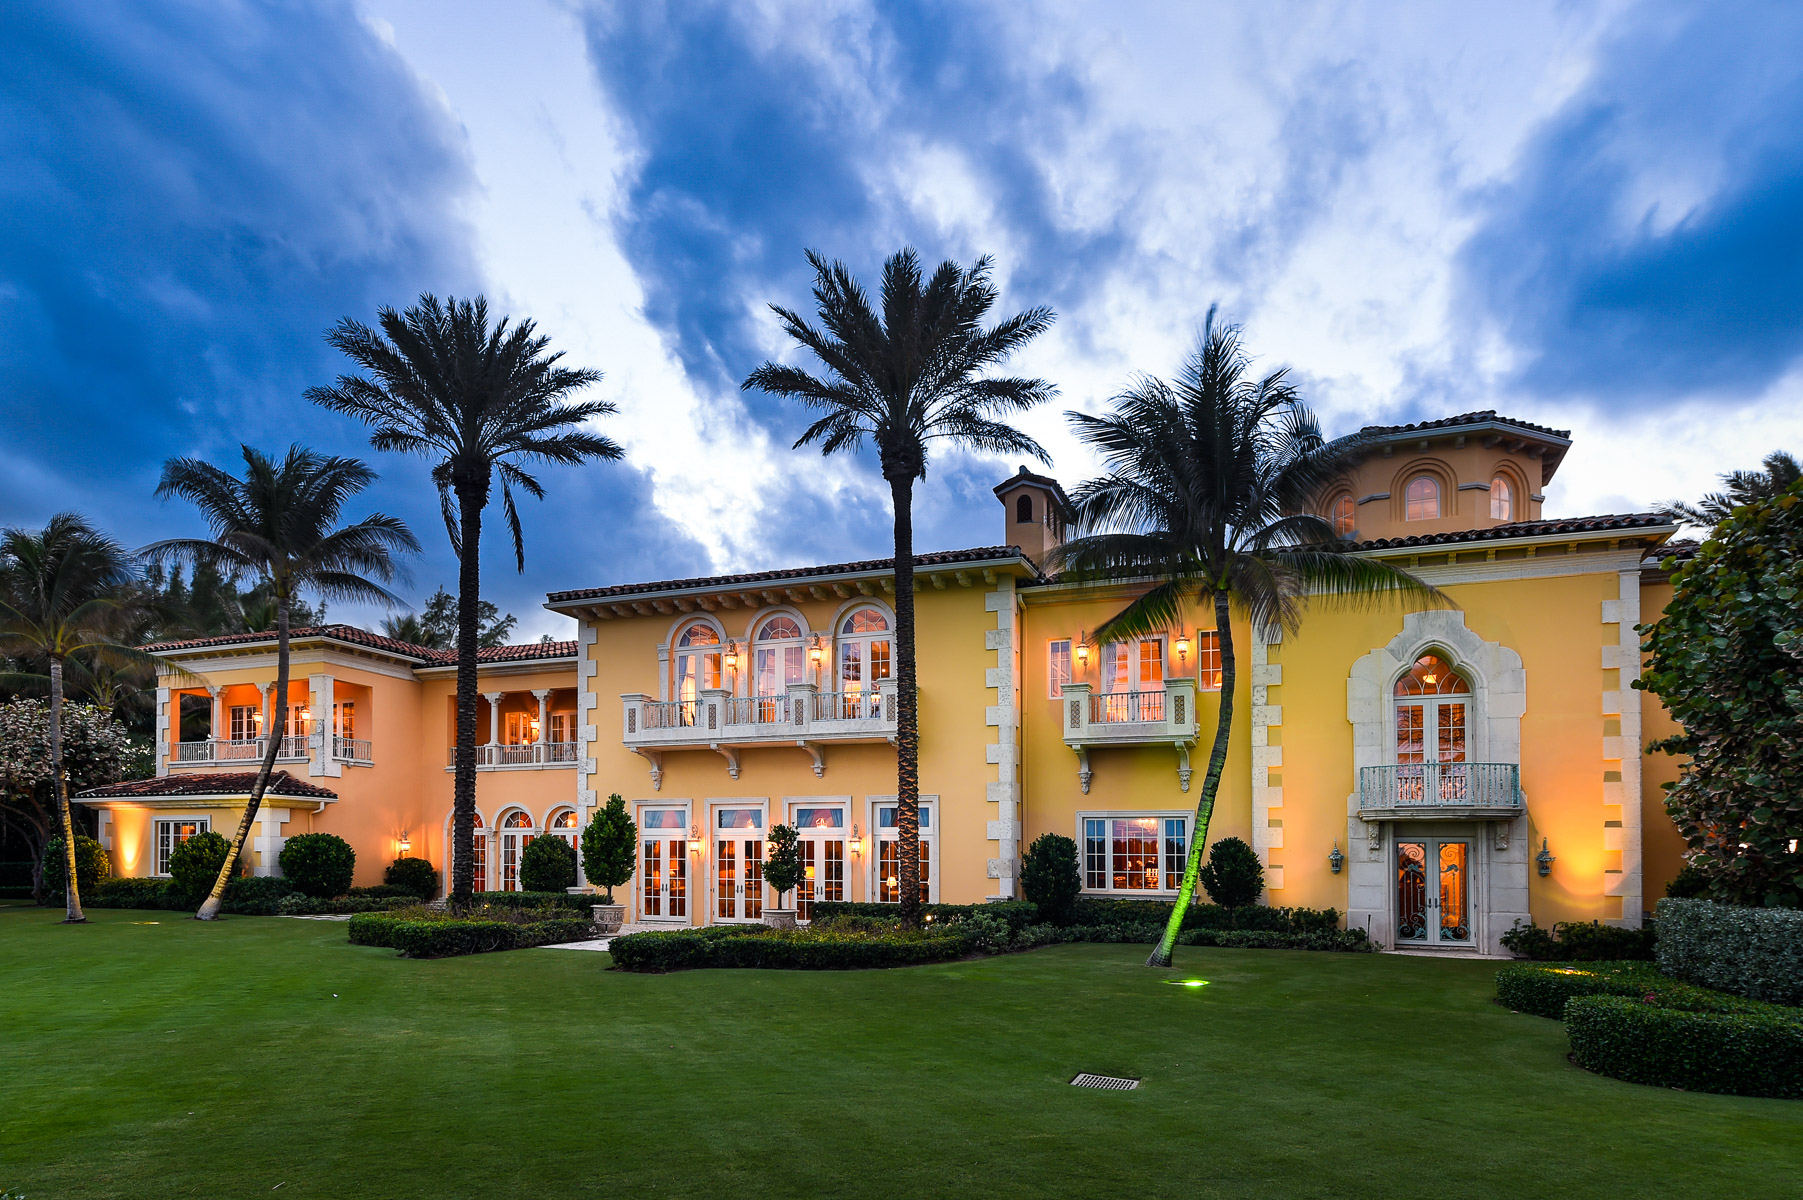 a large yellow mansion with palm trees on the lawn.